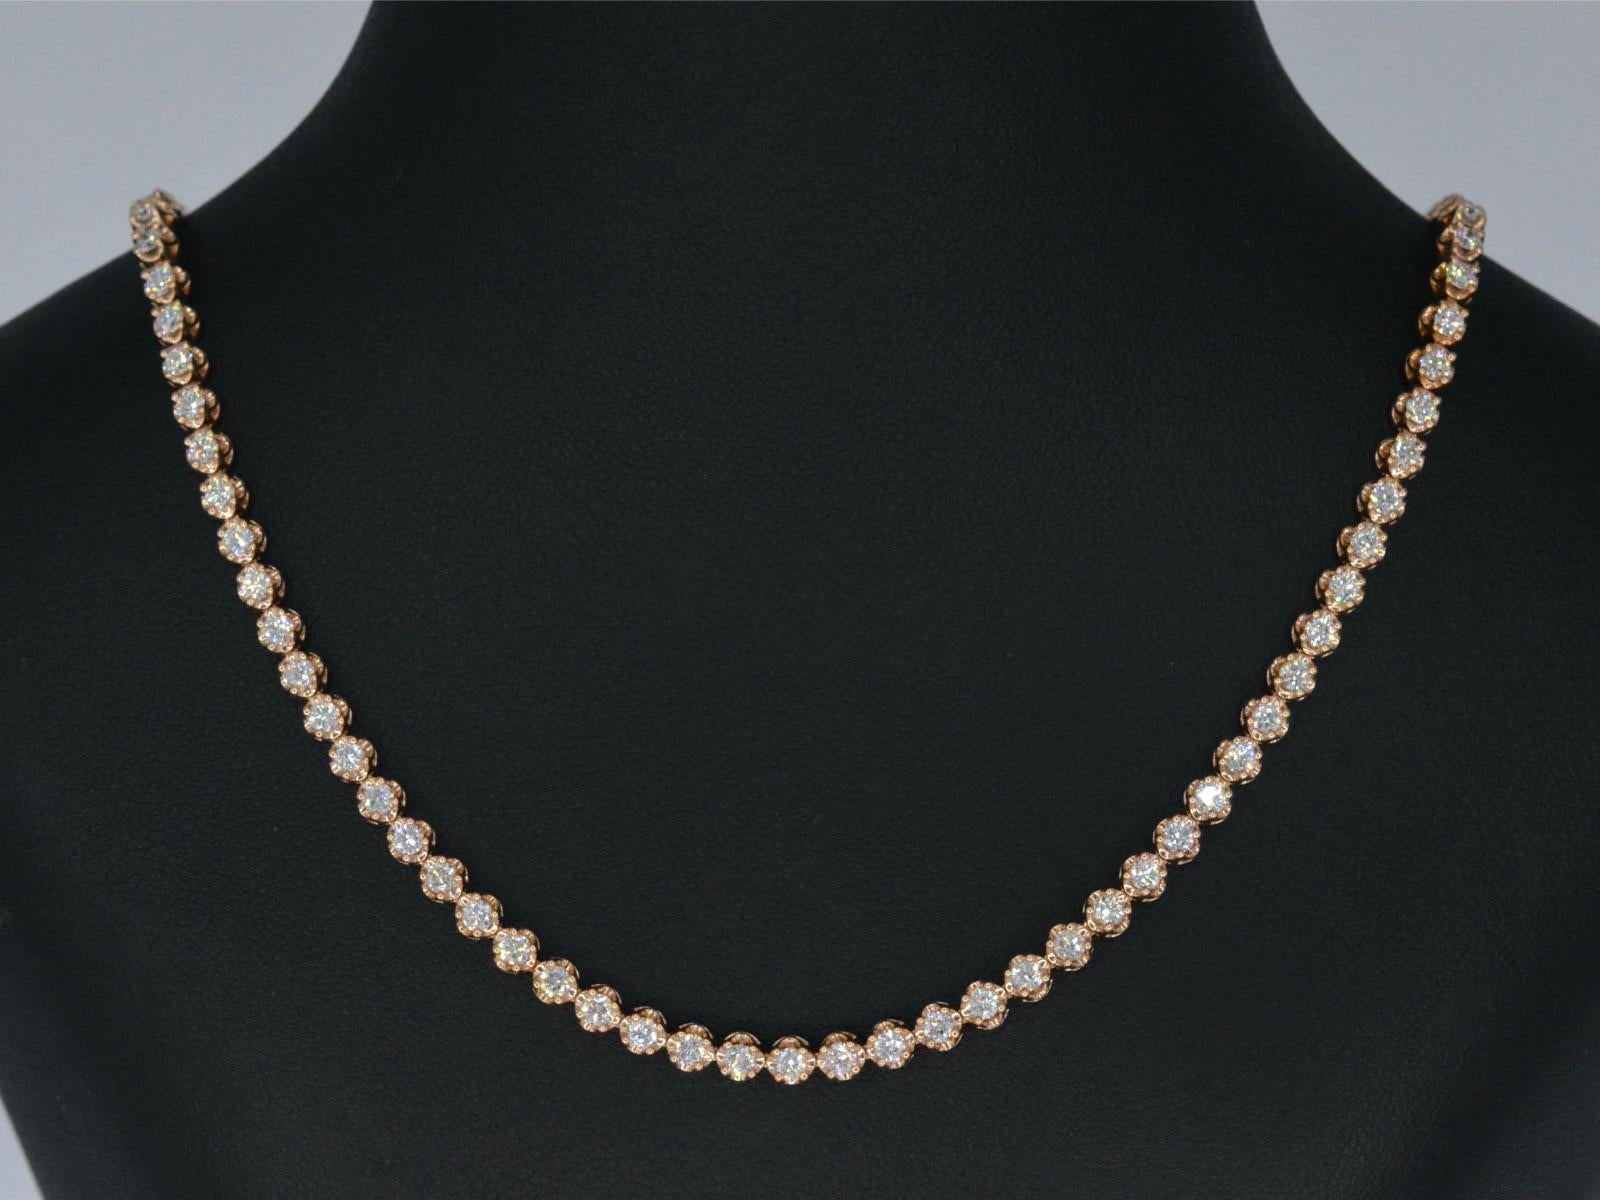 This stunning rose gold necklace boasts 107 brilliant cut diamonds, weighing in at an impressive 6.00 carats. The diamonds are of exceptional quality, with a colour grade of F-G and clarity grade of VS. The necklace itself is crafted from 18K gold